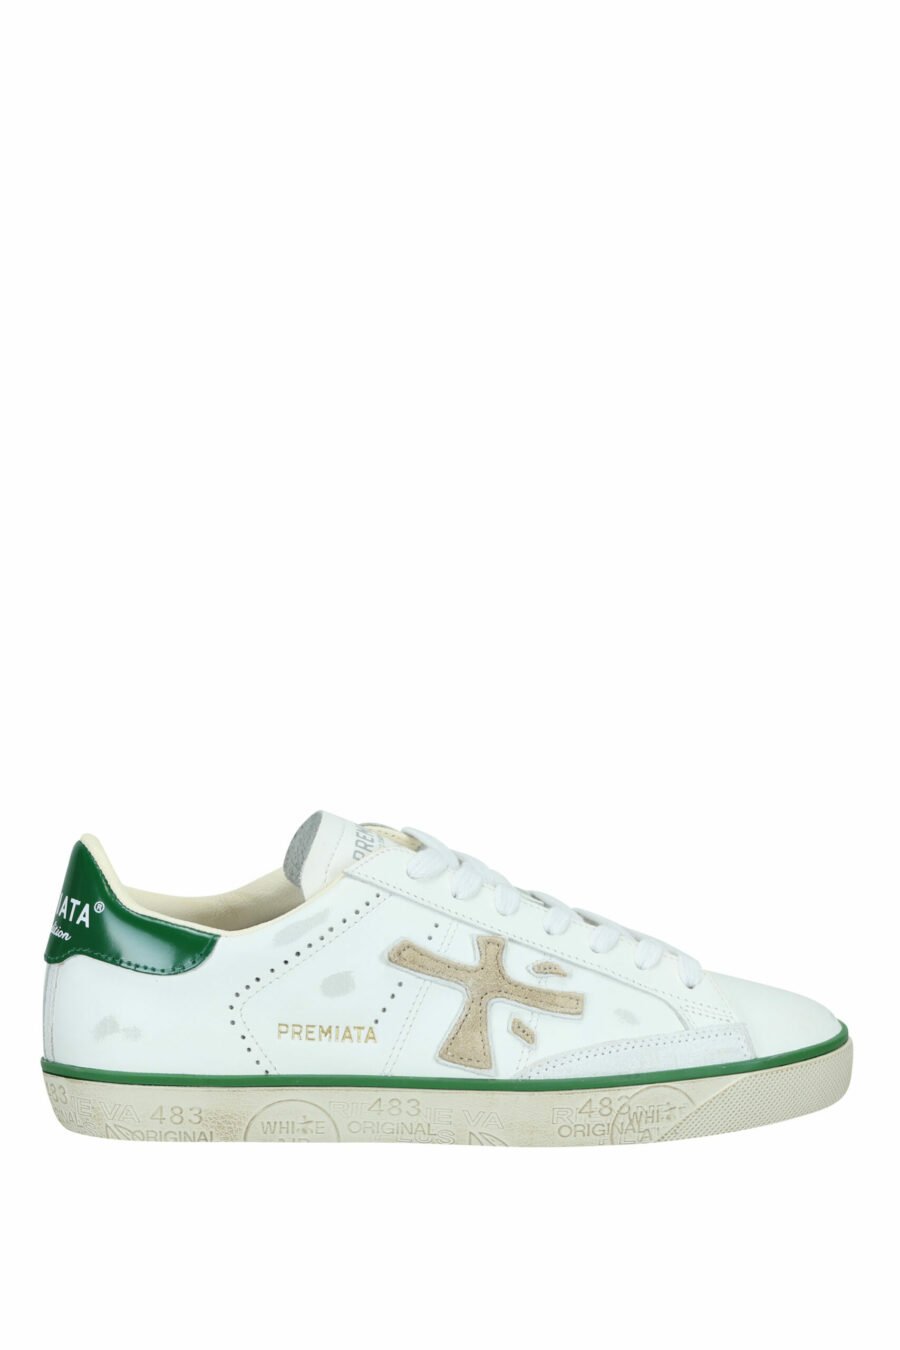 Worn white trainers with green "Steven 6645" - 8053680394497 scaled